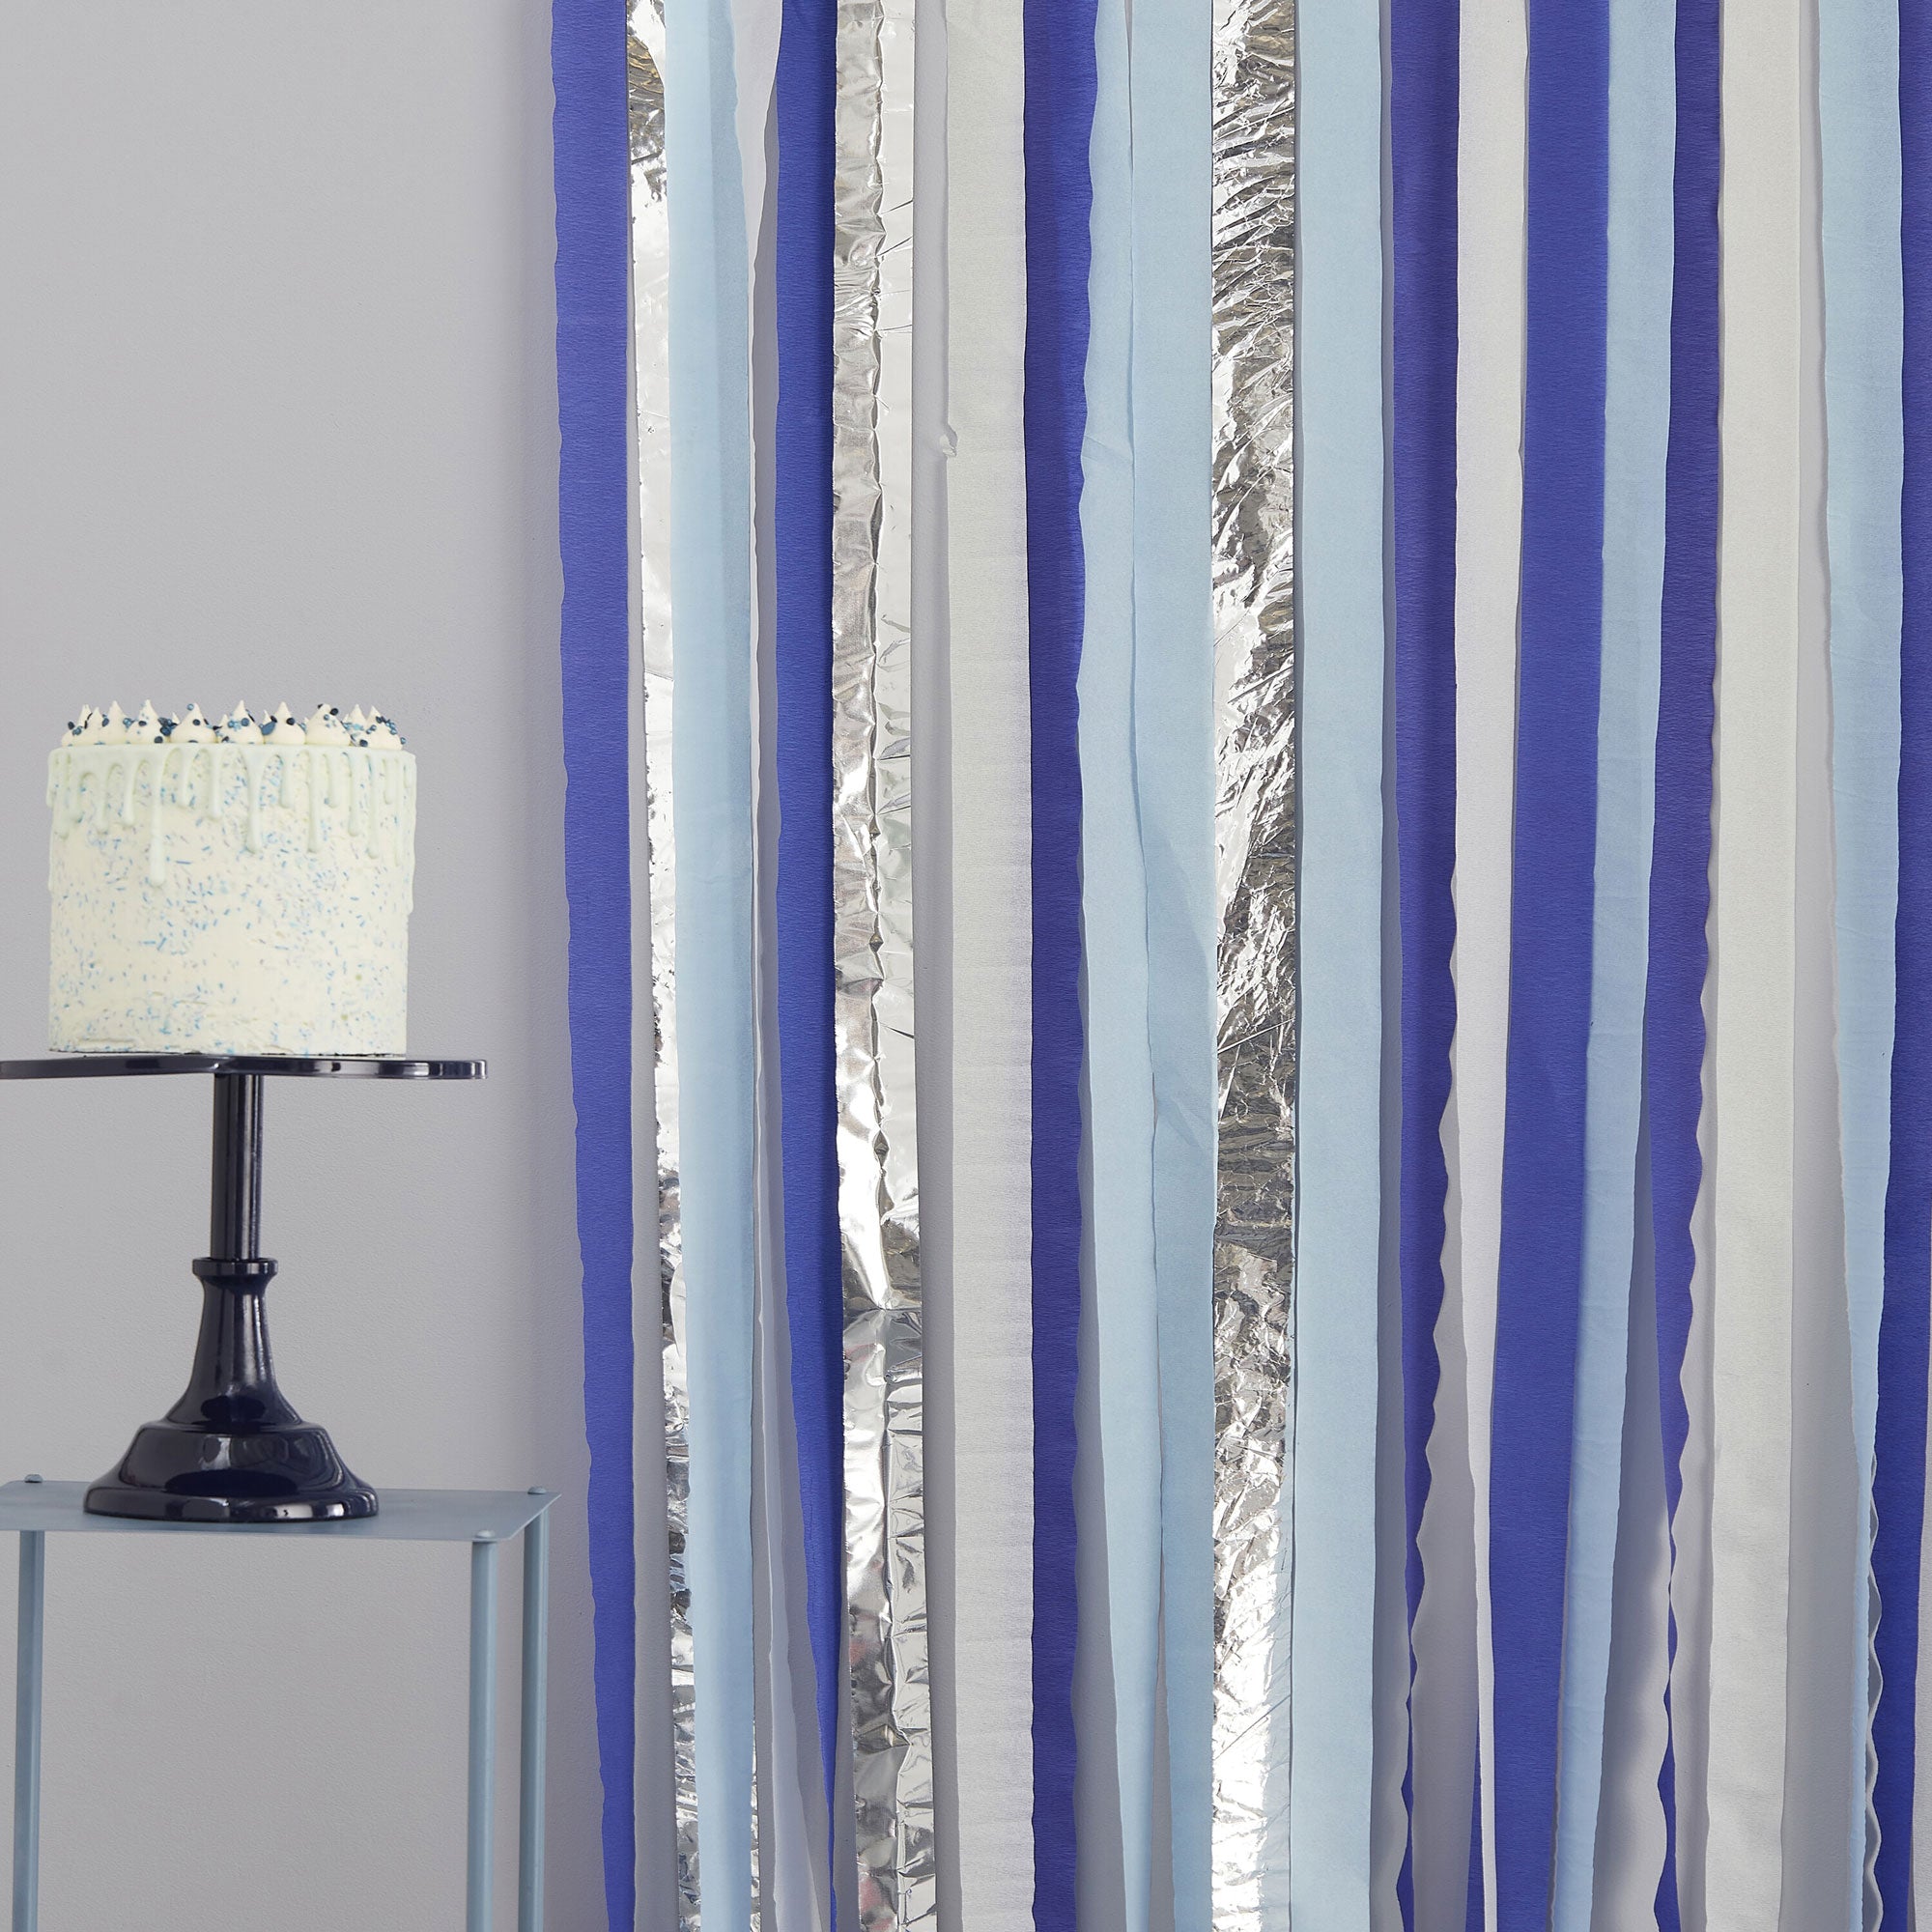 Mix It Up Blue and Silver Streamer Backdrop Decoration